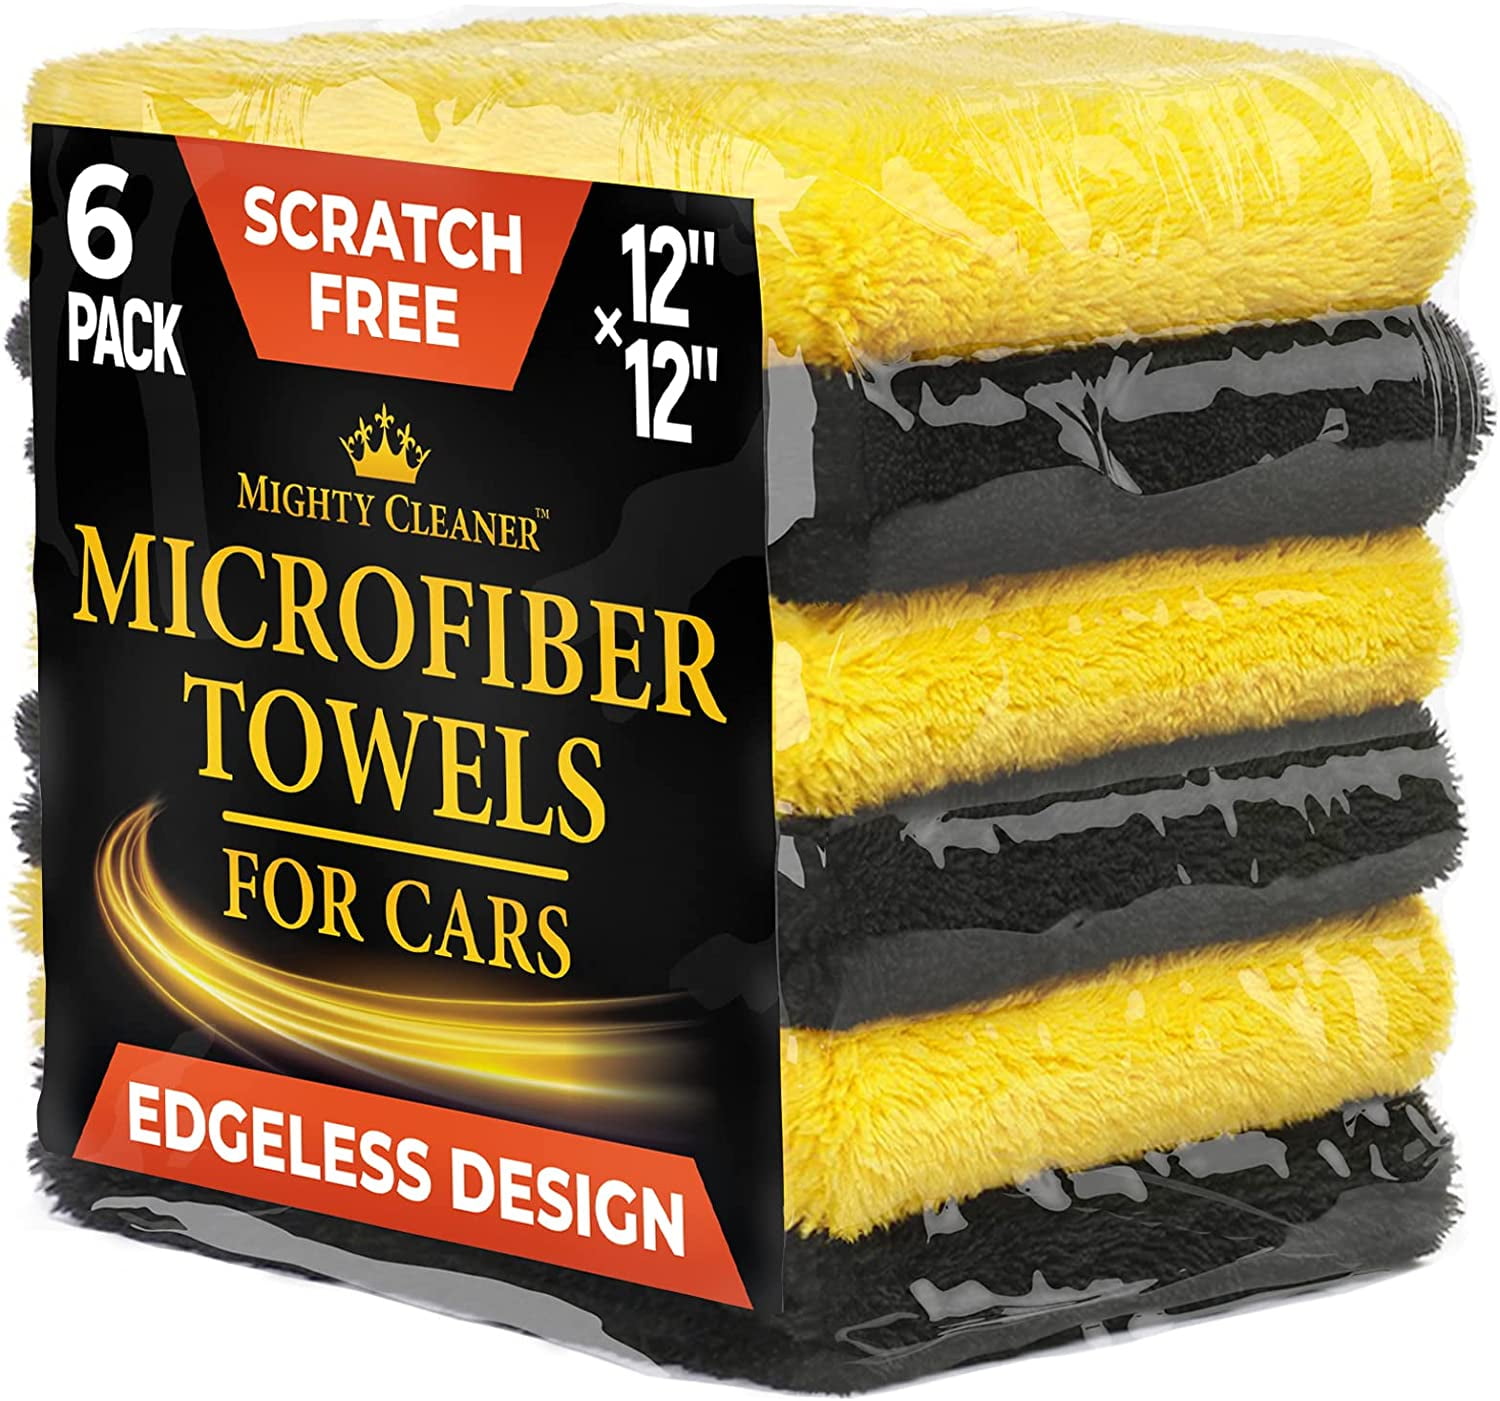 4 X Extra Large Foam Sponges Commercial Car Wash Absorbent Expanding Grout  Clean